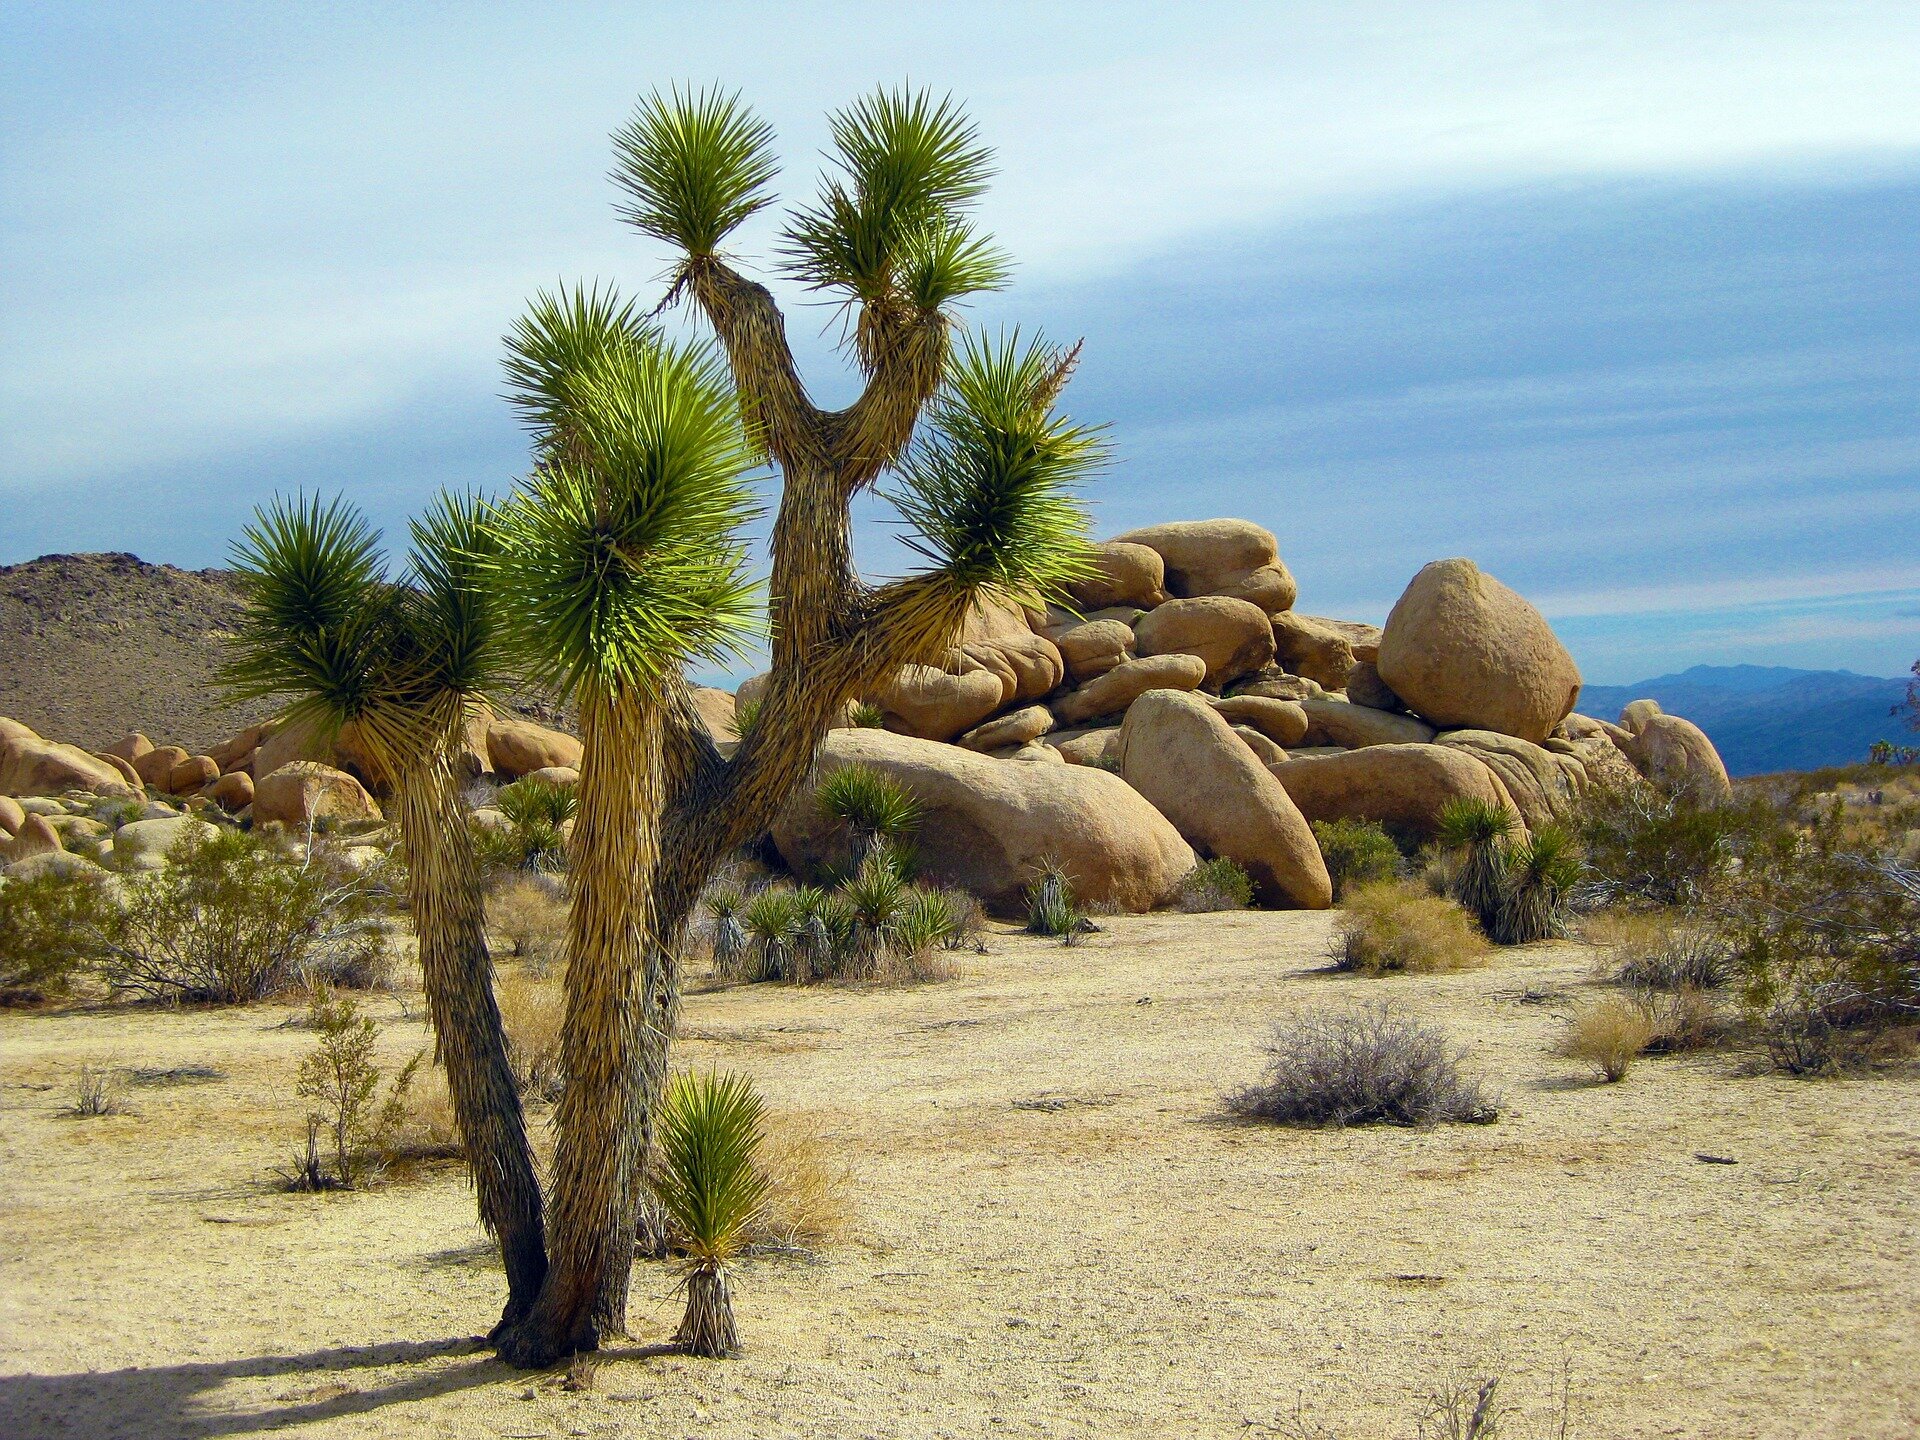 Ravaged by fire Mojave Desert #39 s famed Joshua trees may be gone forever